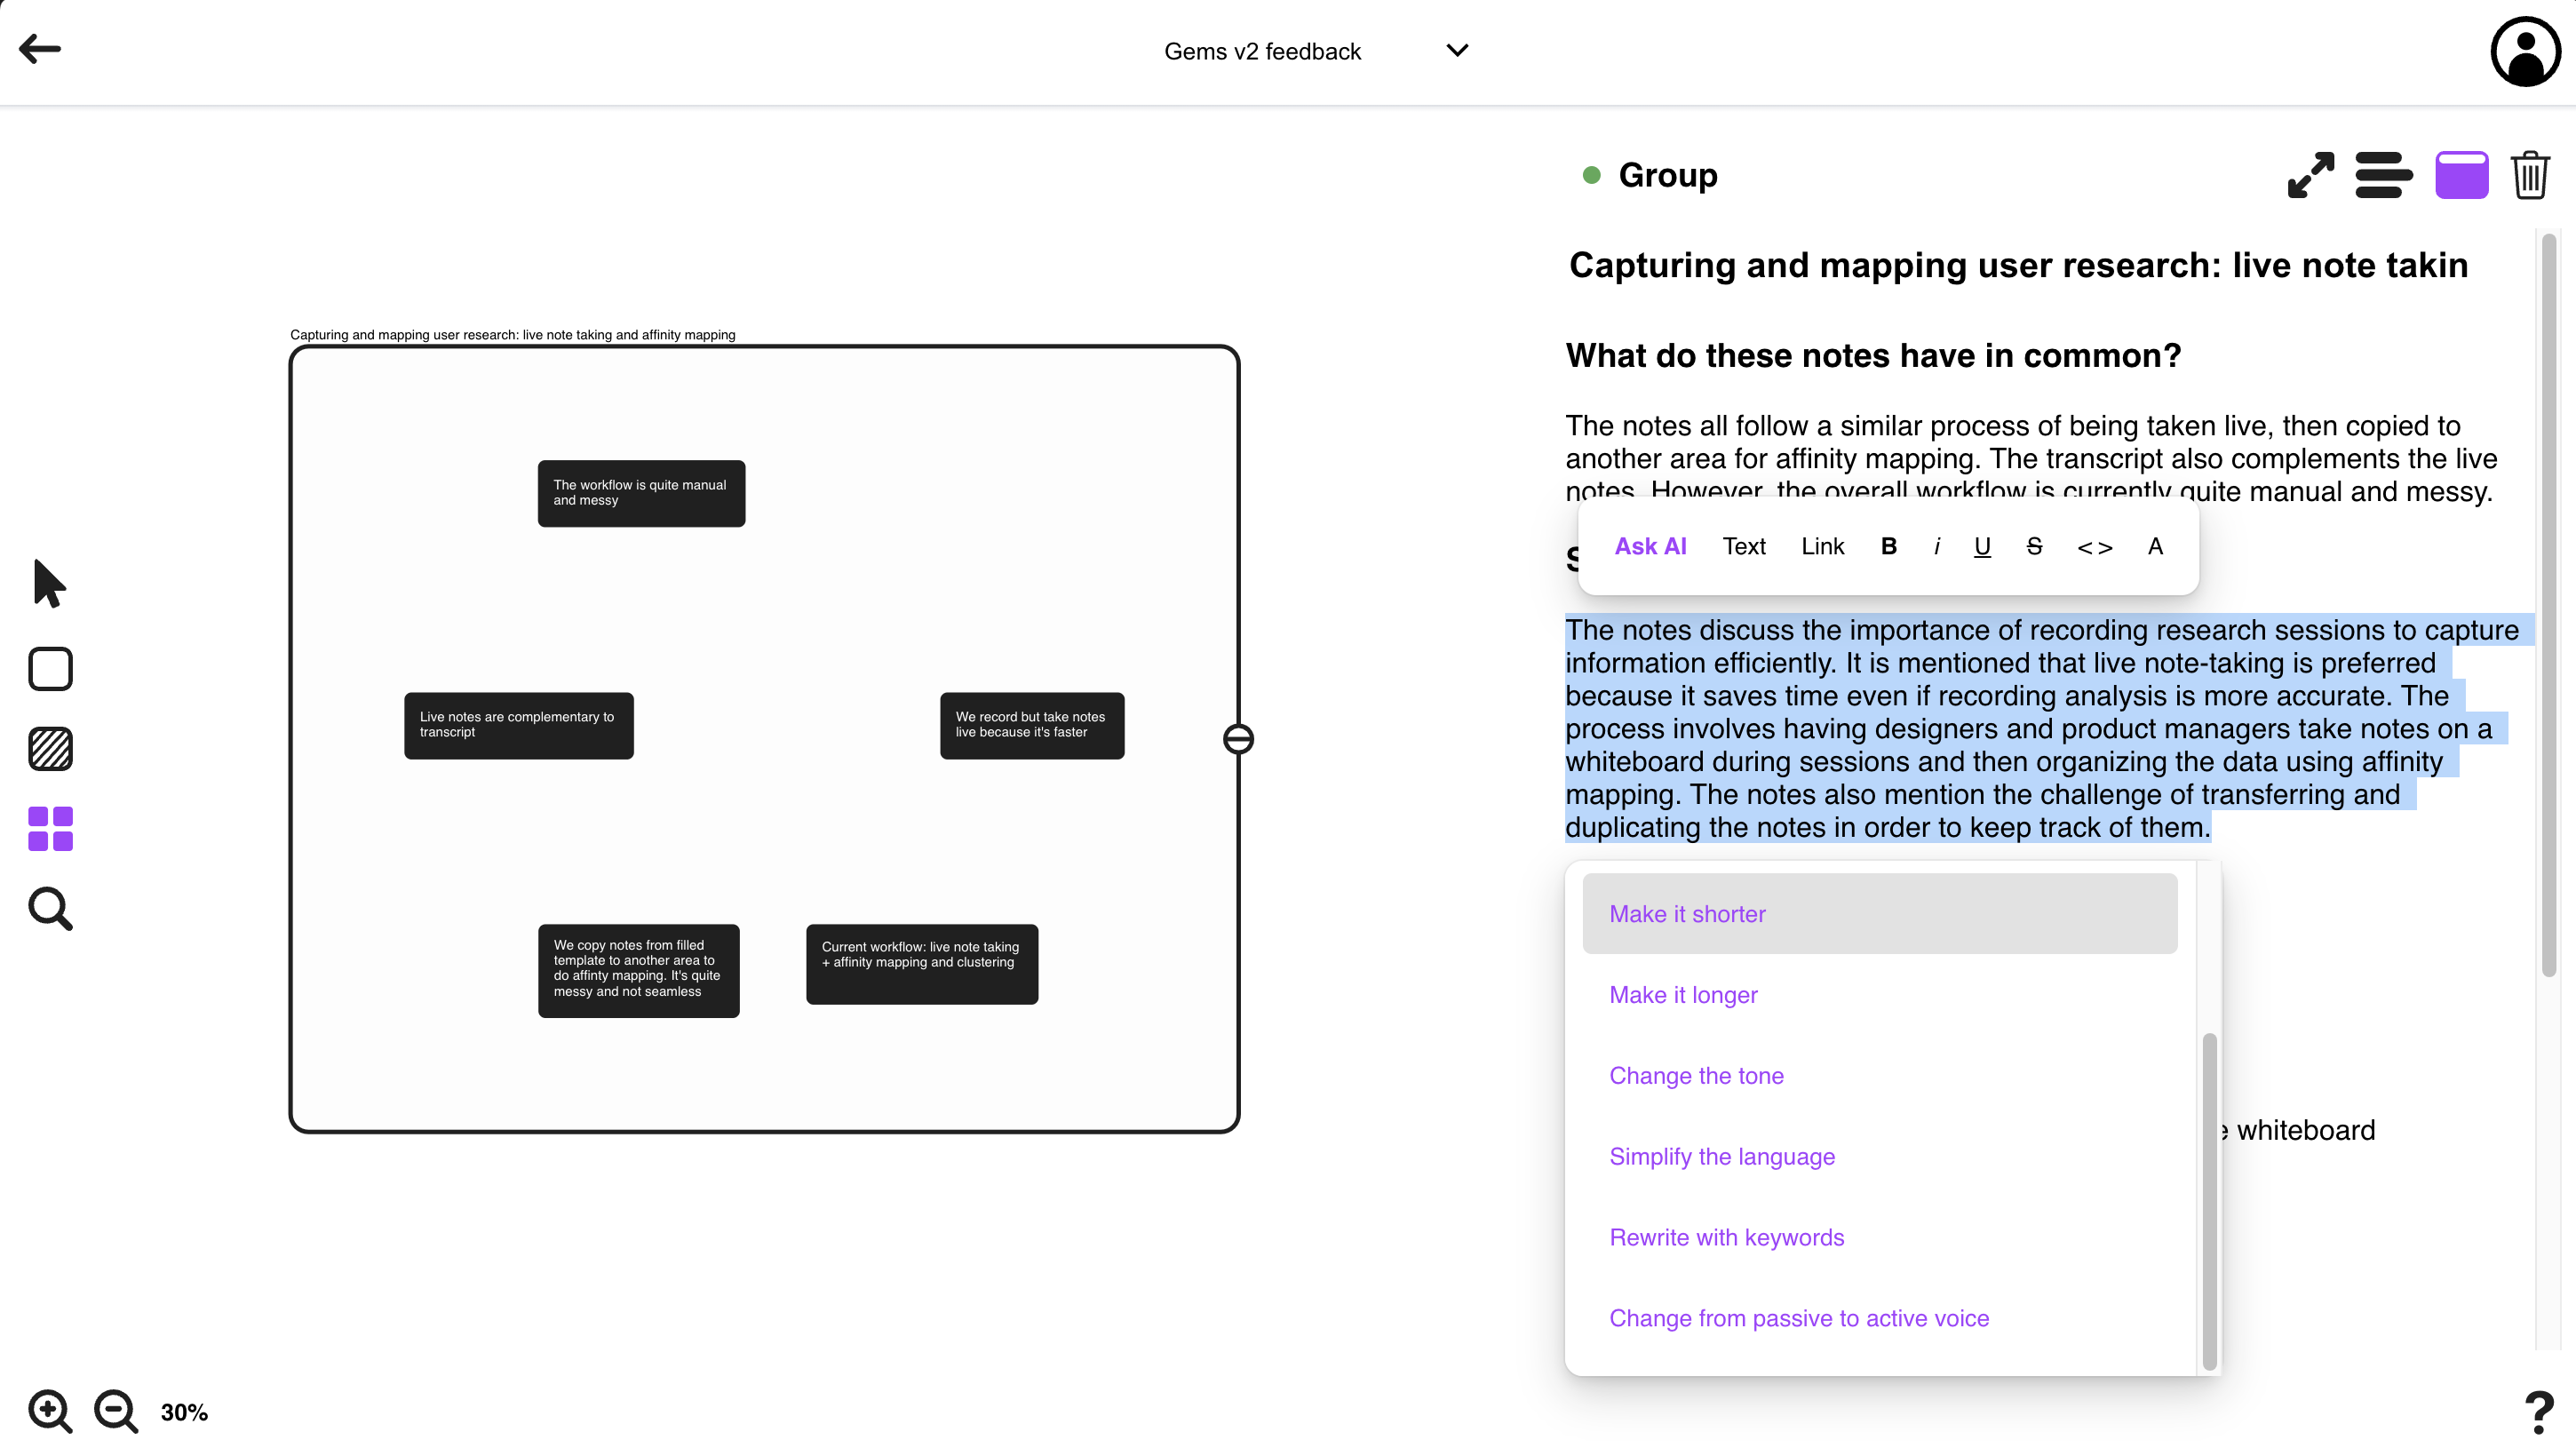 Ask AI to refine text to write research reports more efficiently.